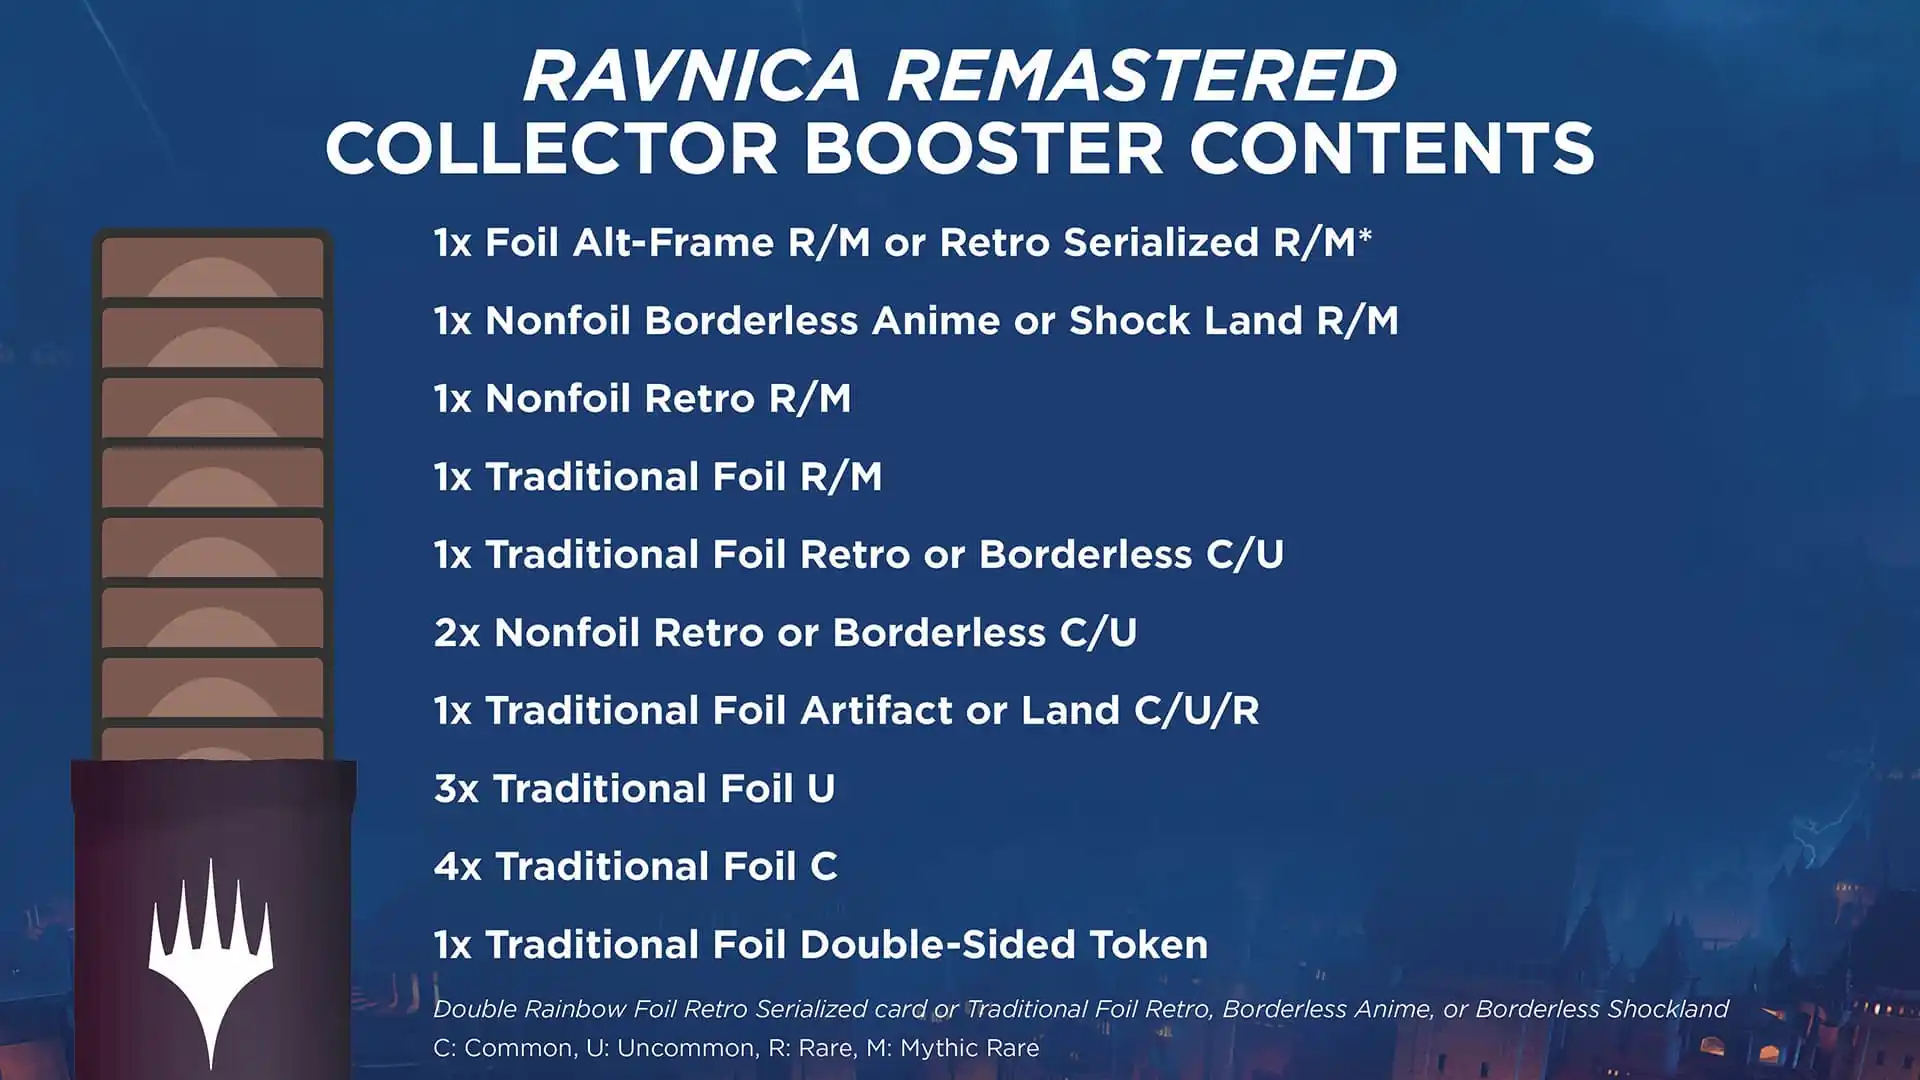 List of all Collector booster contents in Ravnica Remastered MTG set